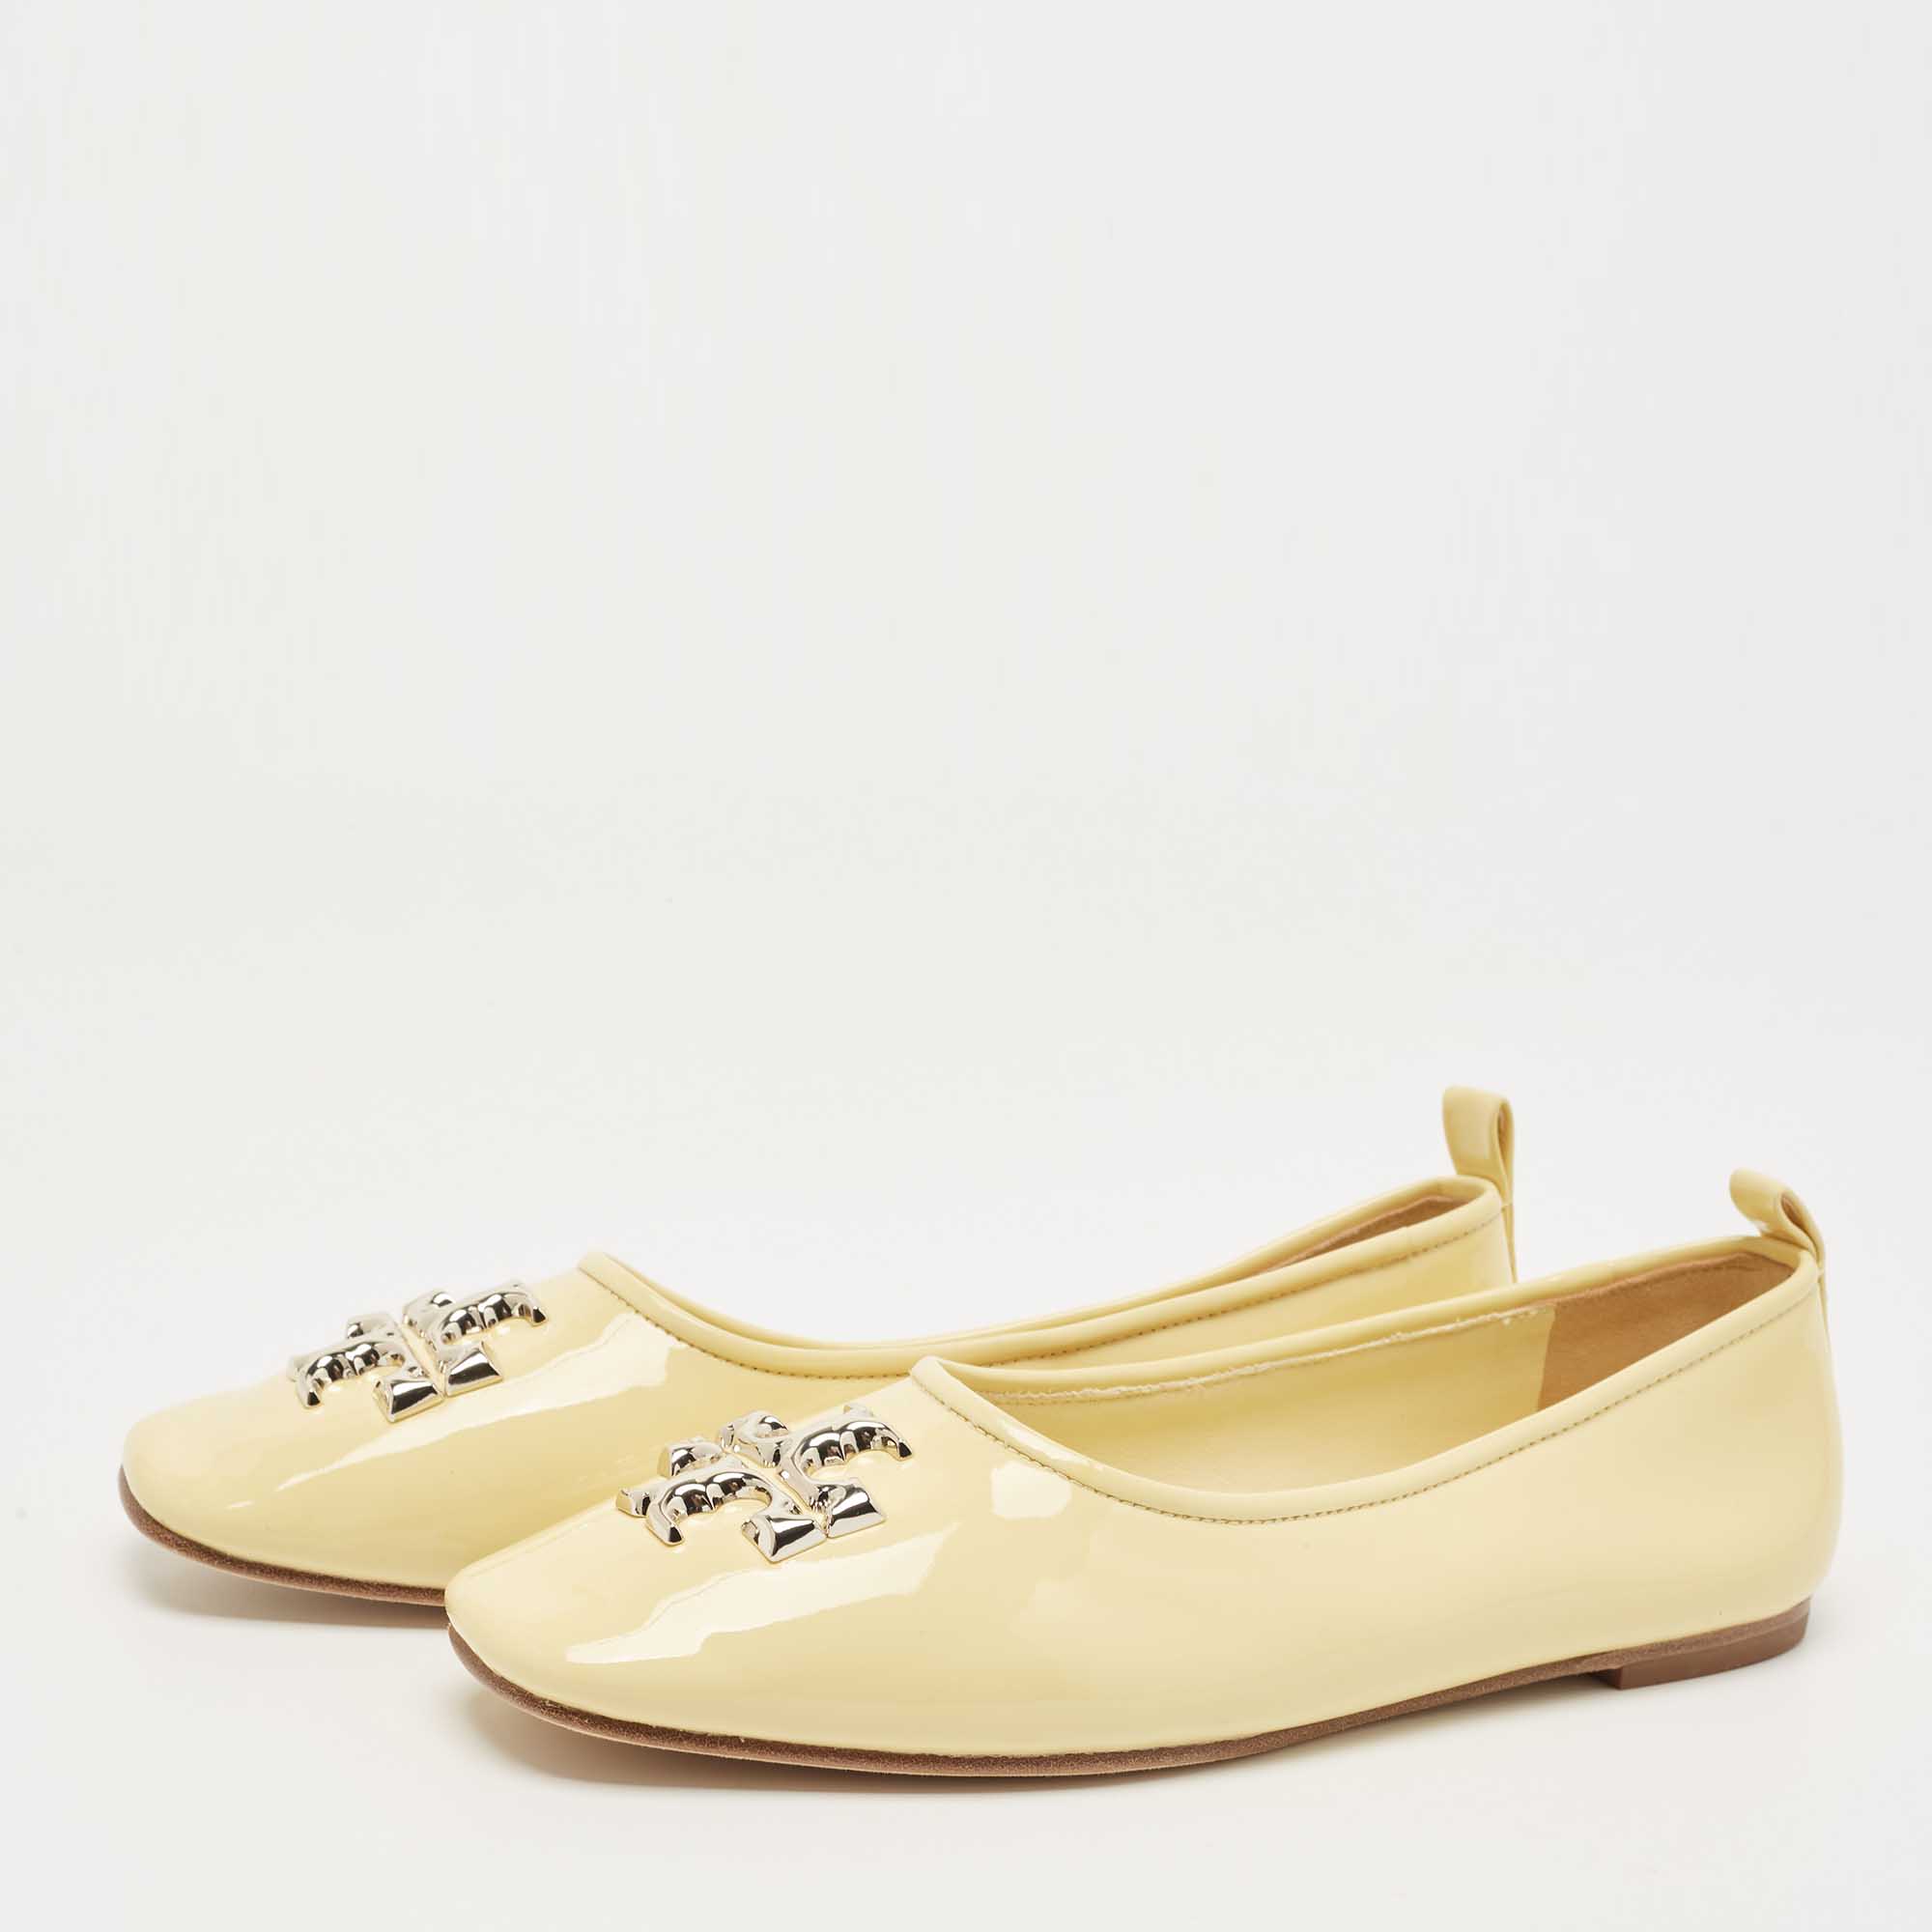 

Tory Burch Yellow Patent Leather Eleanor Ballet Flats Size